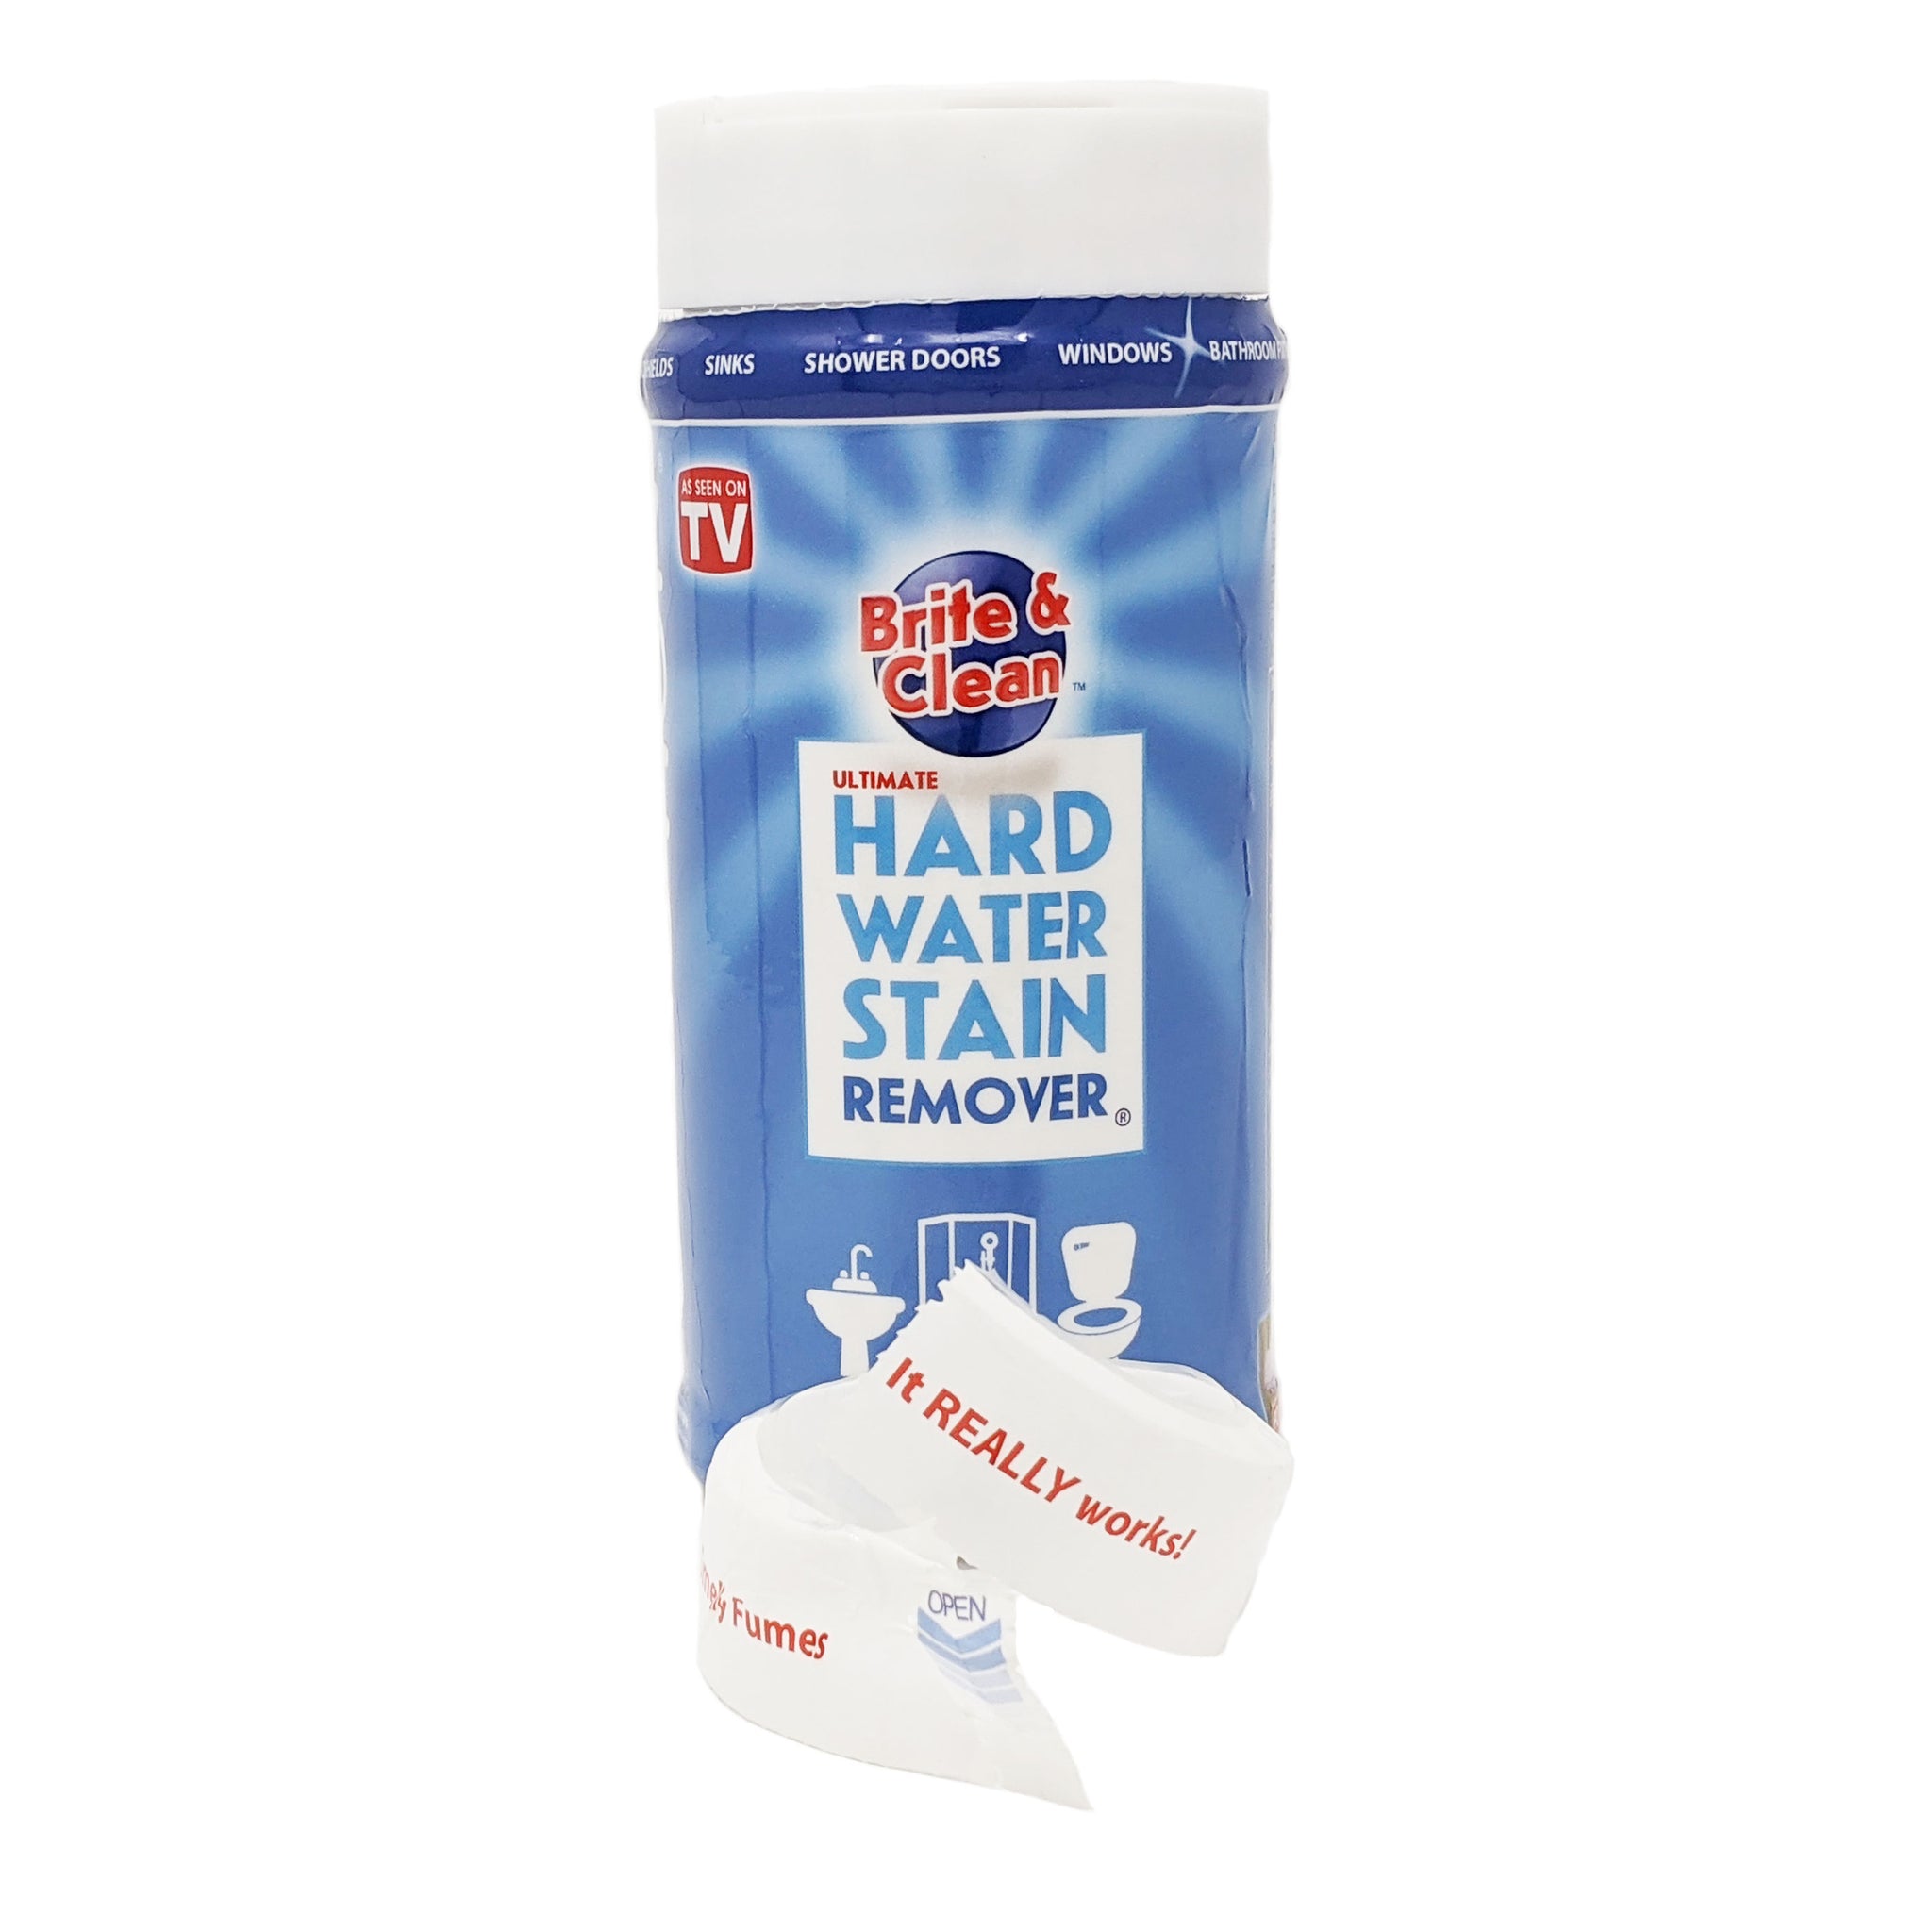 Brite & Clean A-SCS-1 Ultimate Hard Water Stain Remover, 6 oz